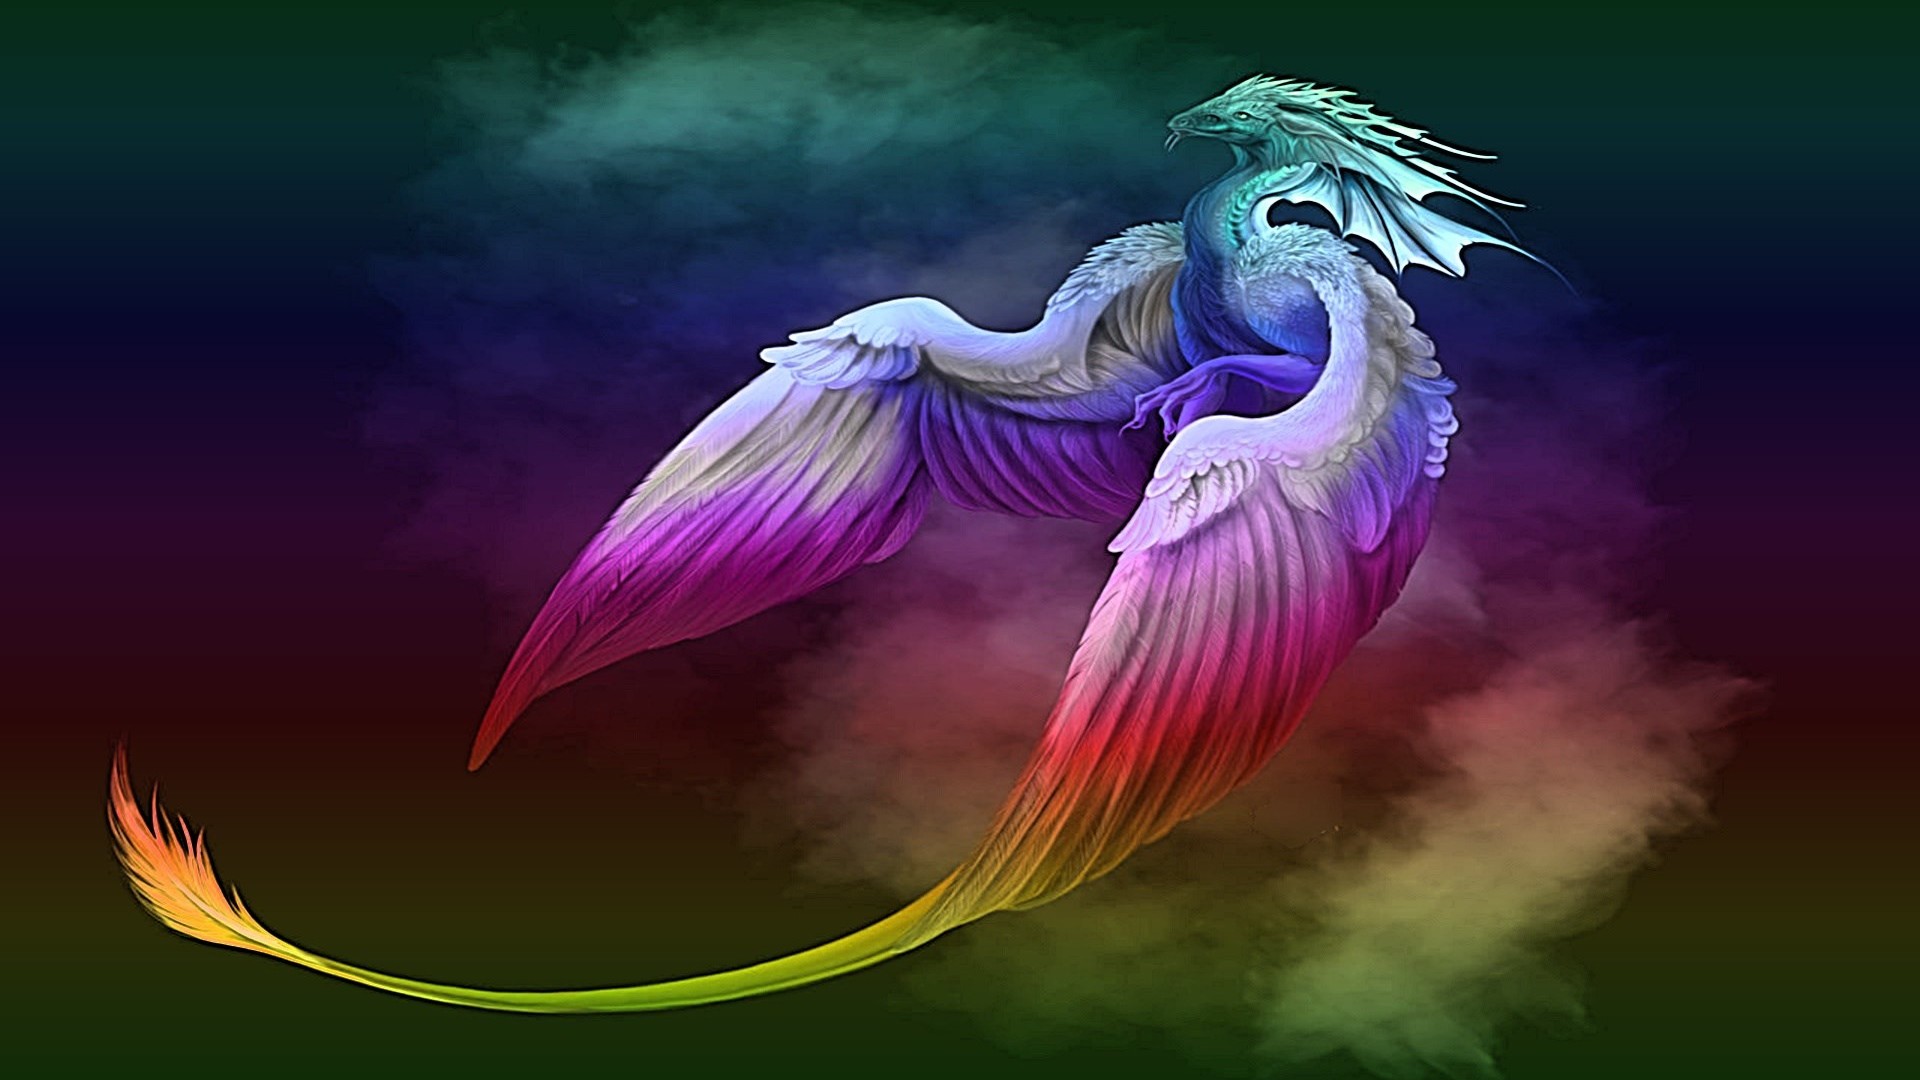 Ice Phoenix Background Wallpaper HD With Resolution 1920X1080 pixel. You can make this wallpaper for your Desktop Computer Backgrounds, Mac Wallpapers, Android Lock screen or iPhone Screensavers